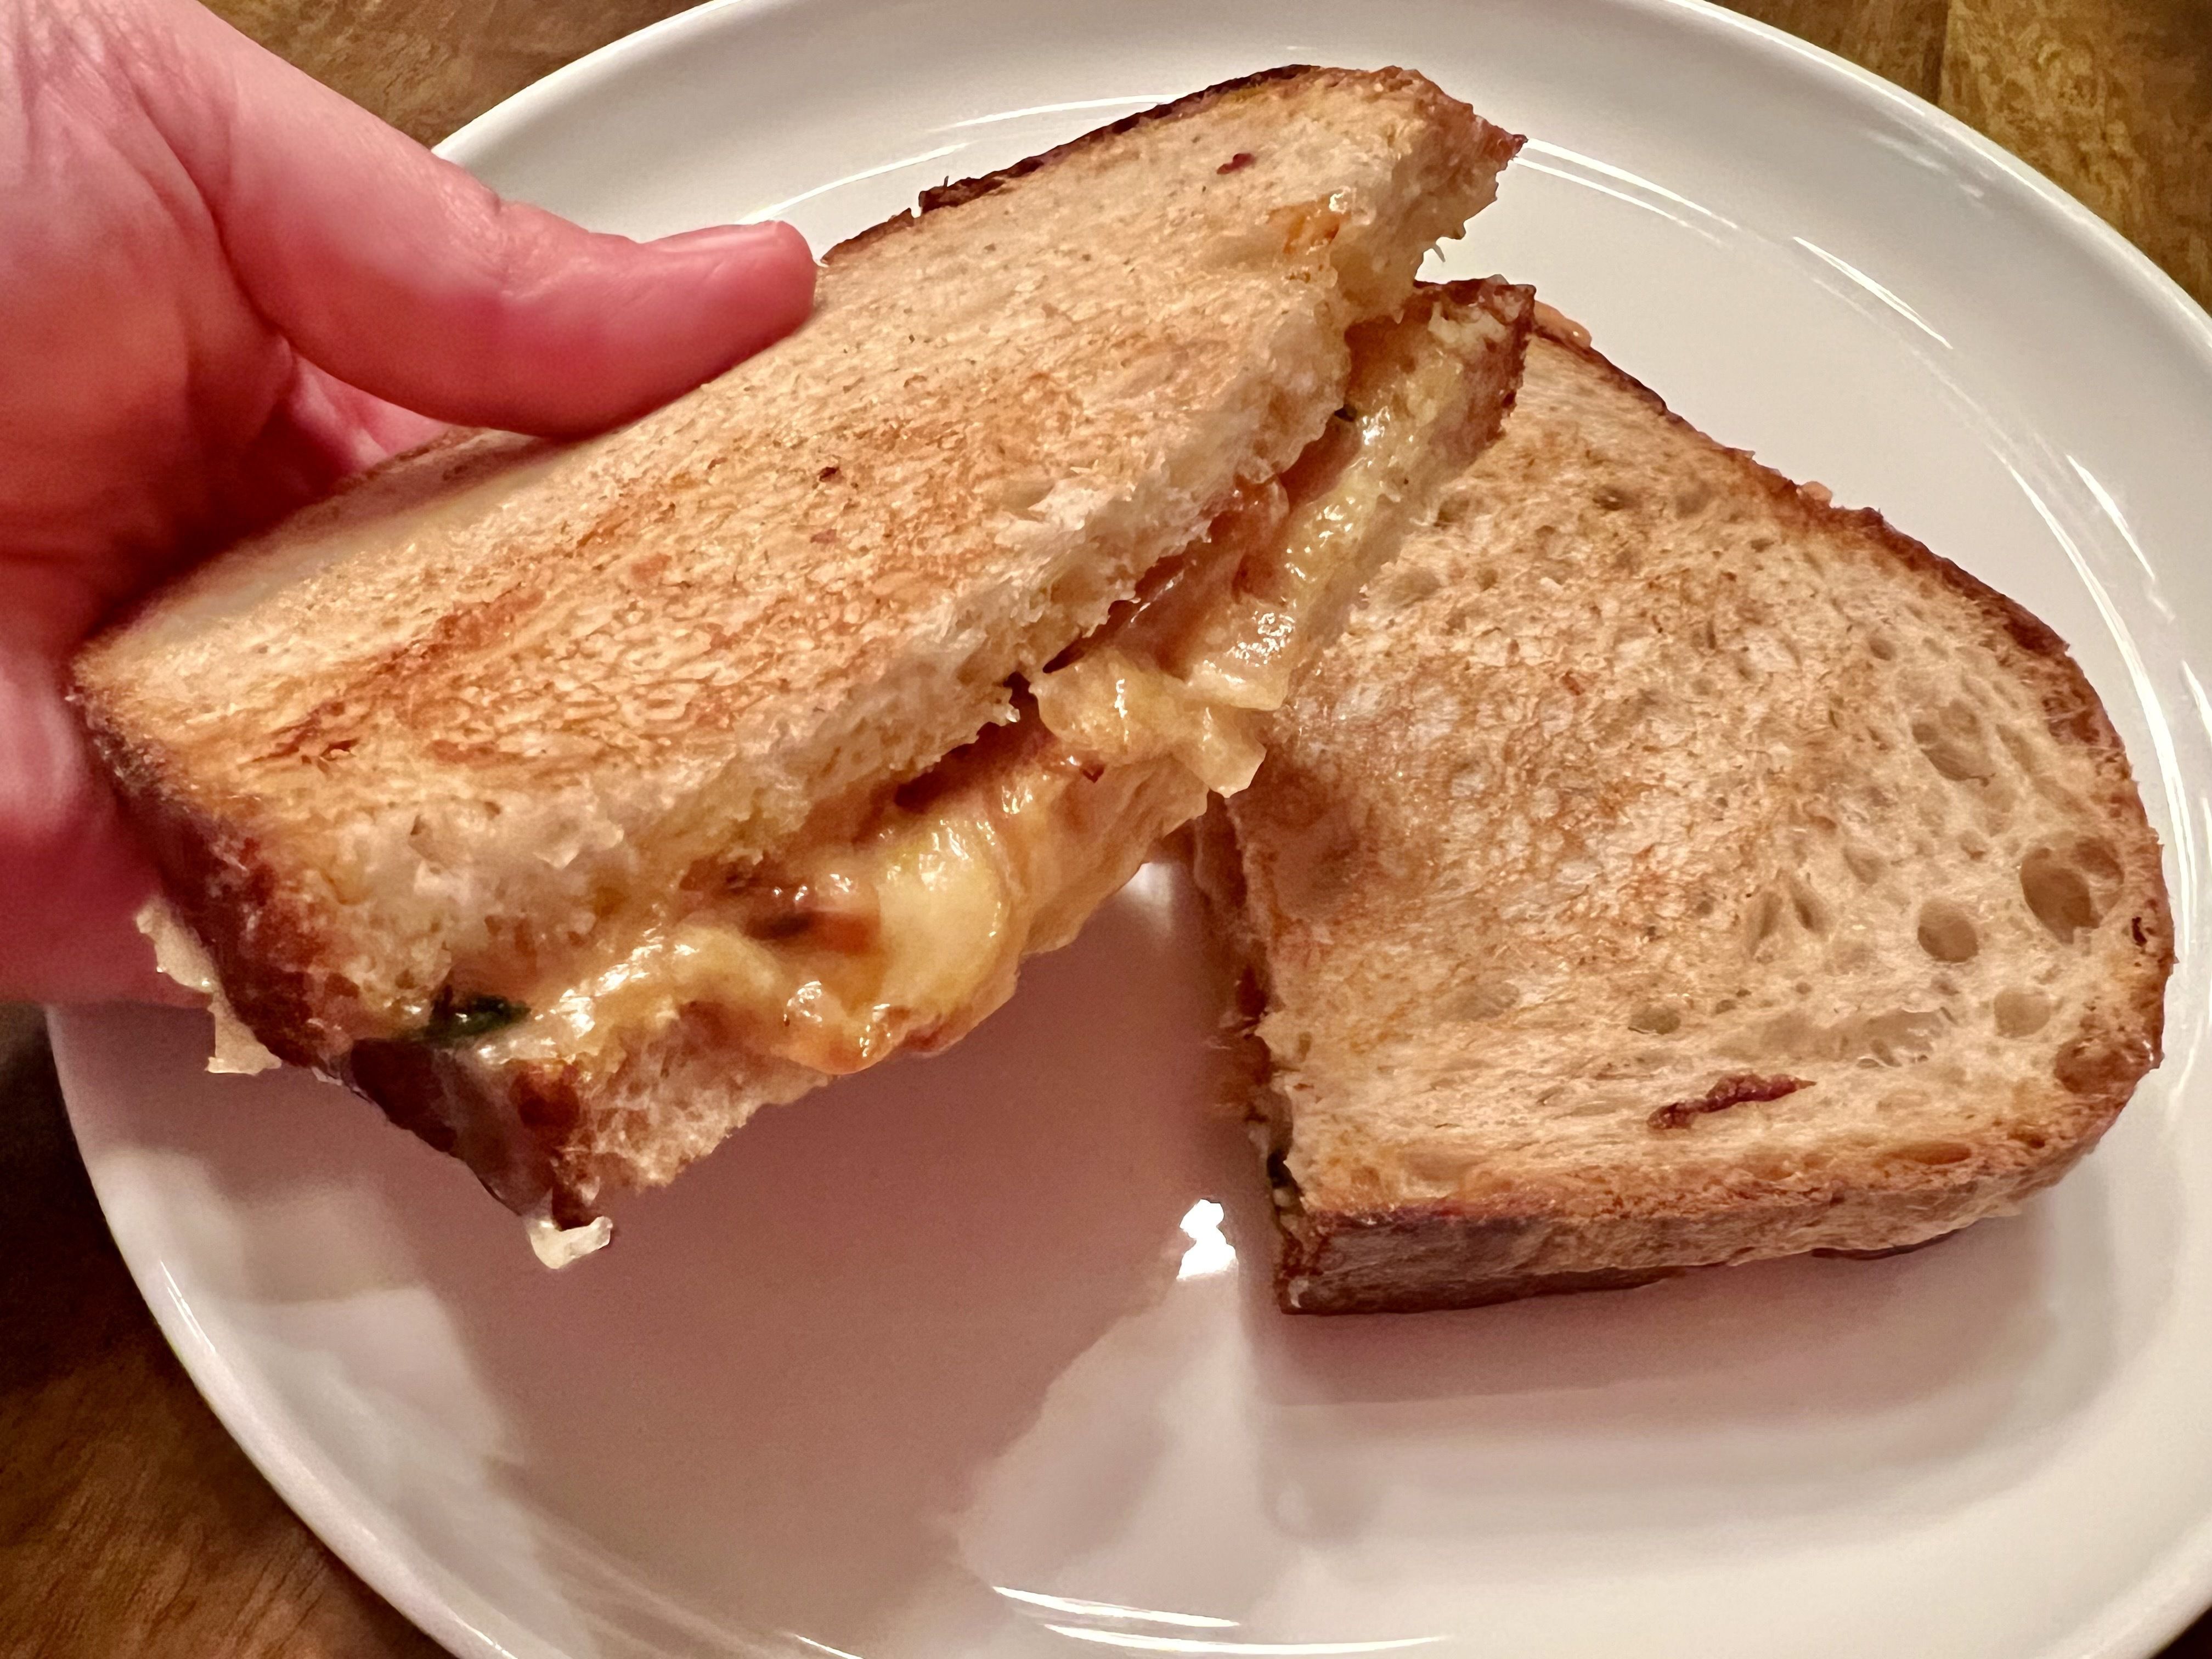 A hand holds up one half of a grilled cheese while the other half sits on a white plate.